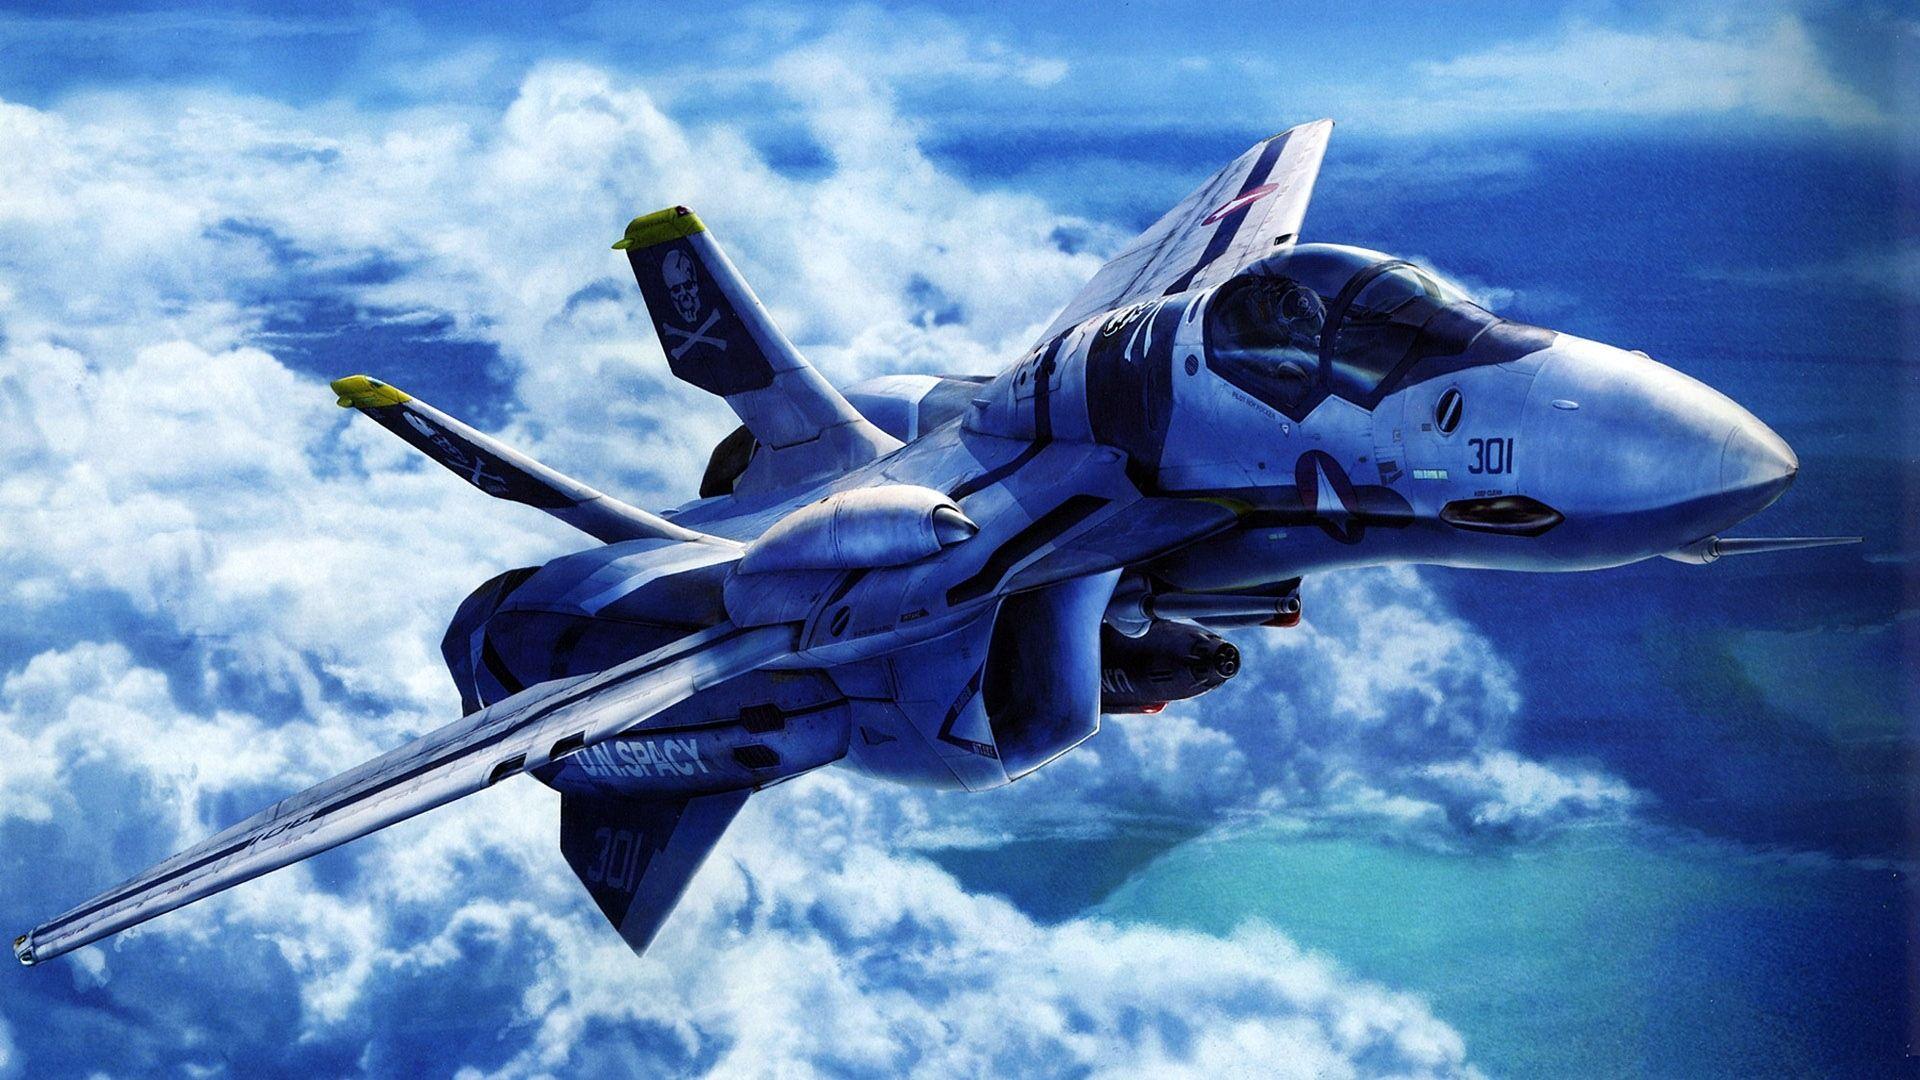 High Quality Fighter Jet Wallpaper. Full HD Picture